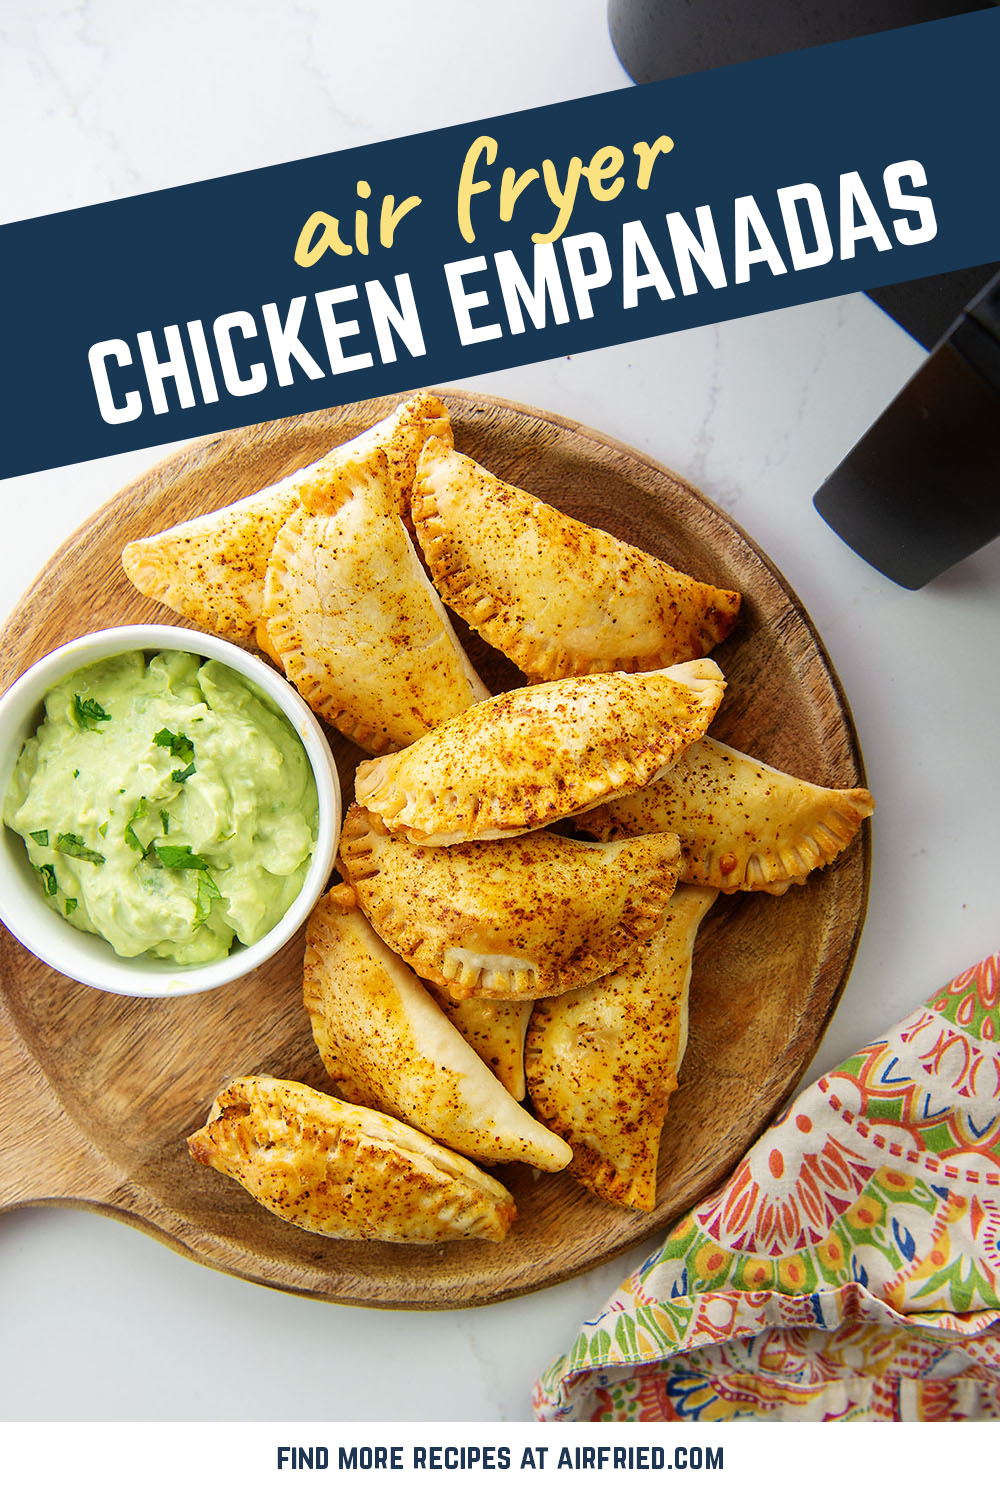 These homemade empanadas are stuffed full of chicken and cheese.